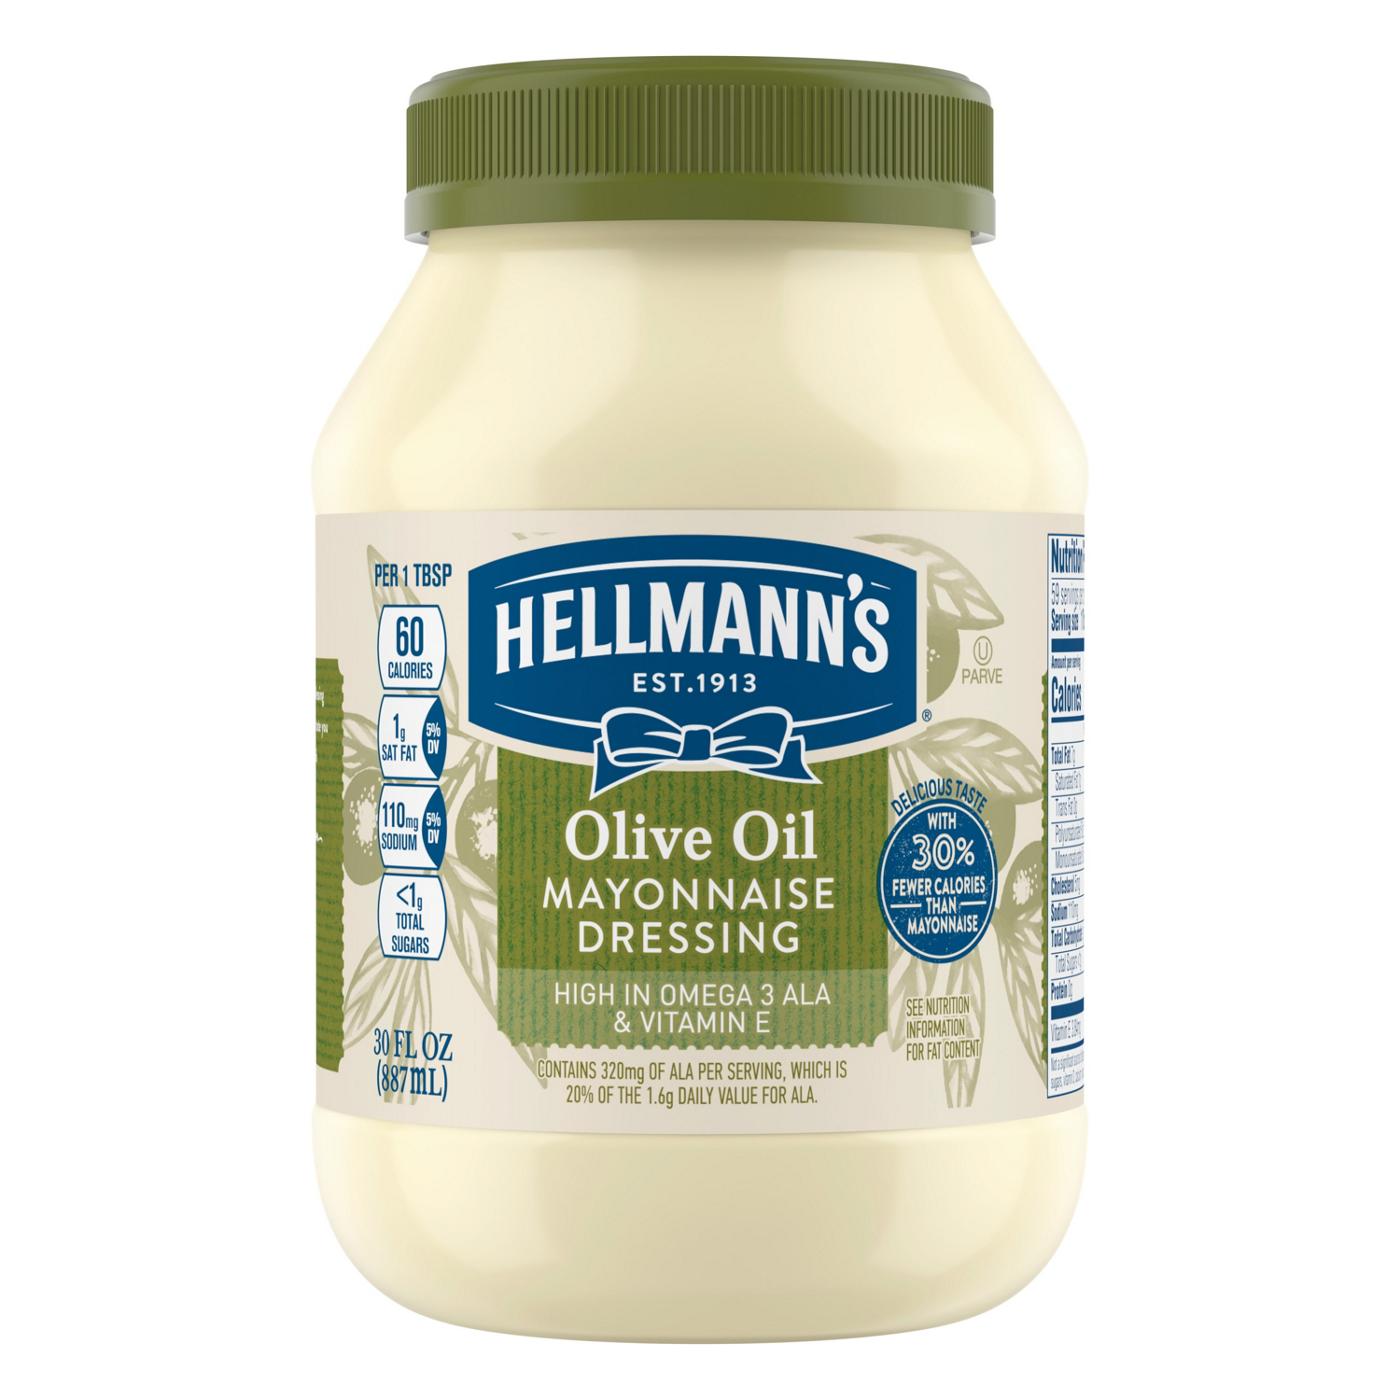 Hellmann's Mayonnaise Dressing with Olive Oil; image 1 of 9